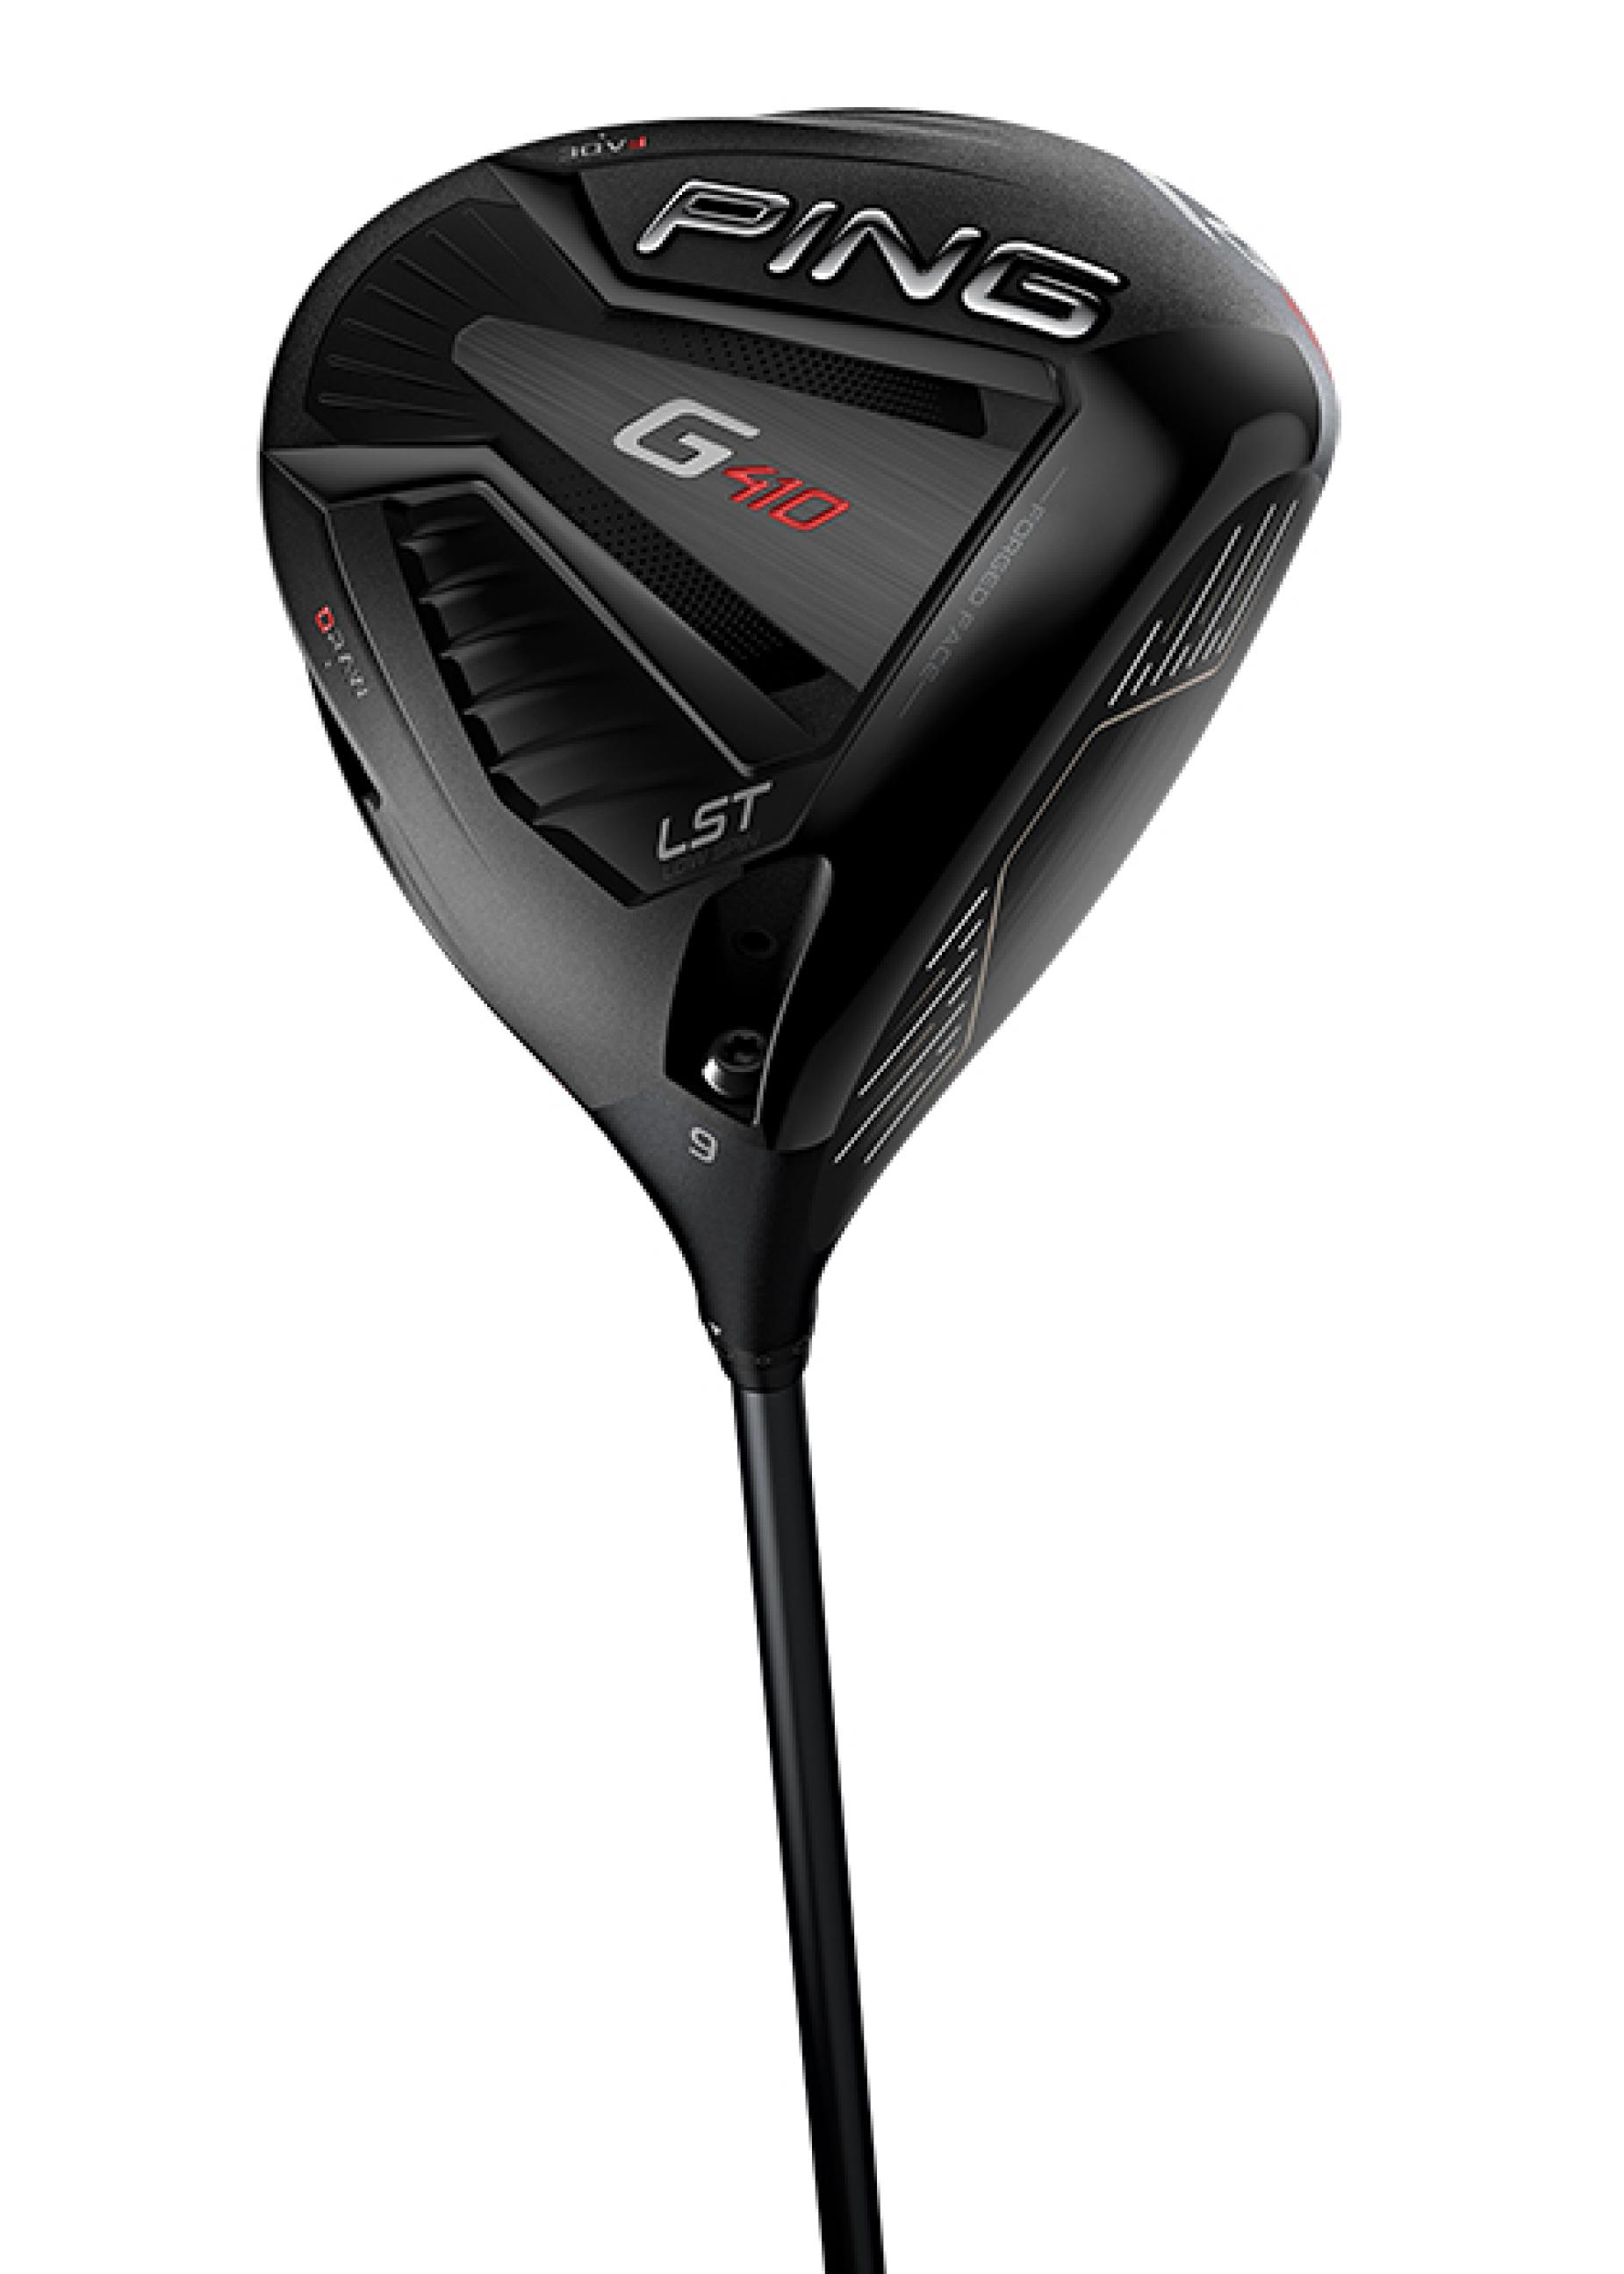 Ping G410 LST driver expands the company's G410 lineup to include low